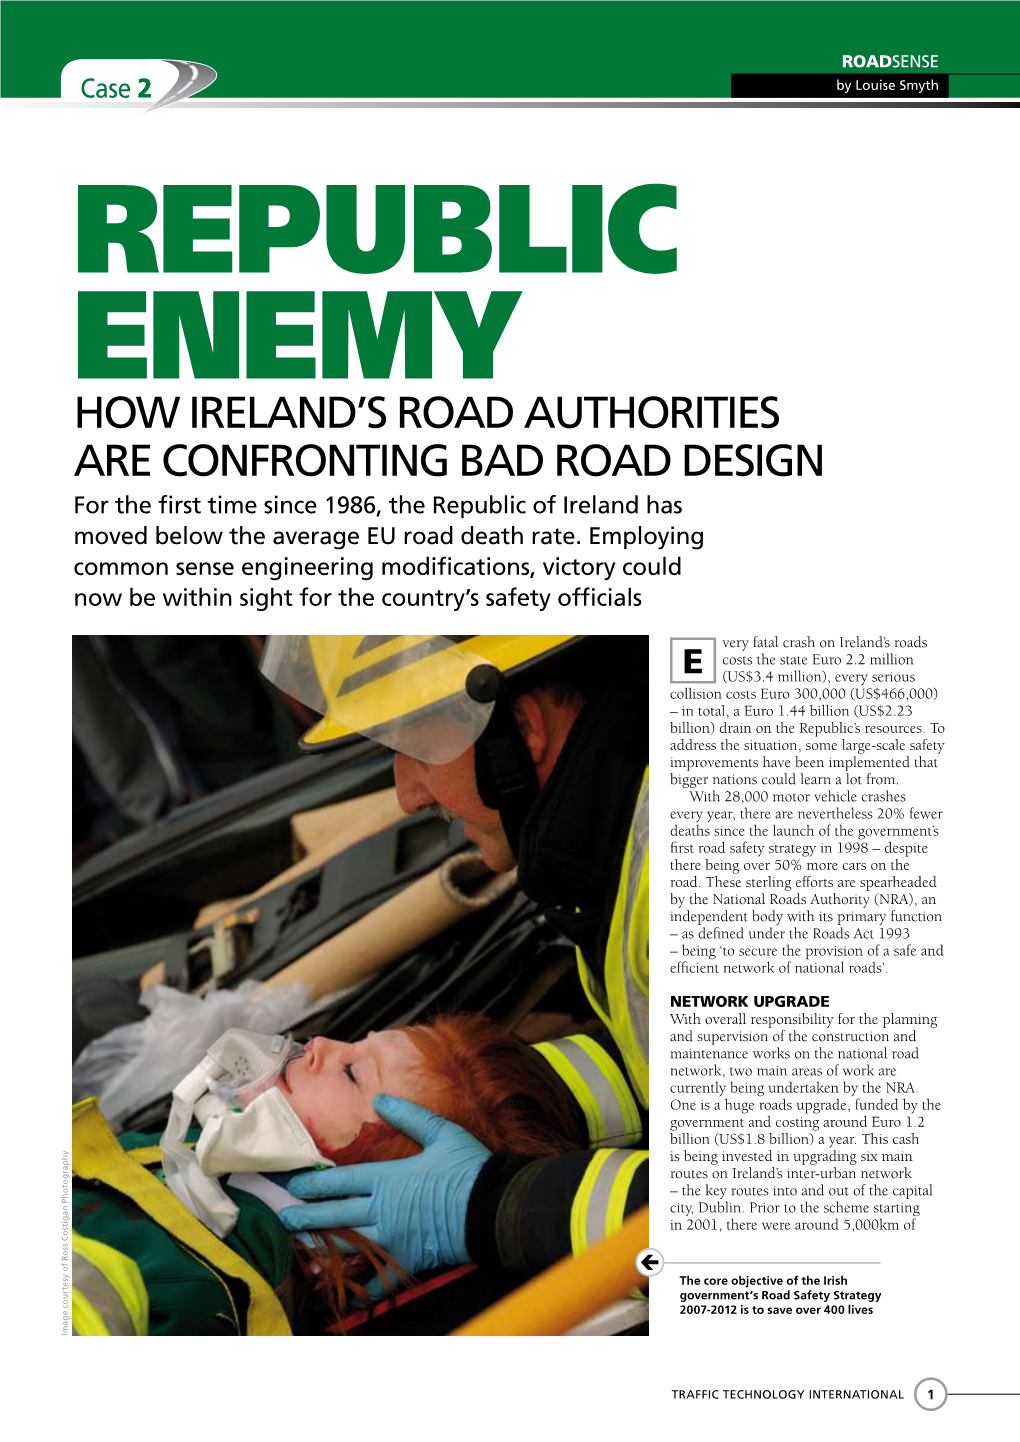 How Ireland's Road Authorities Are Confronting Bad Road